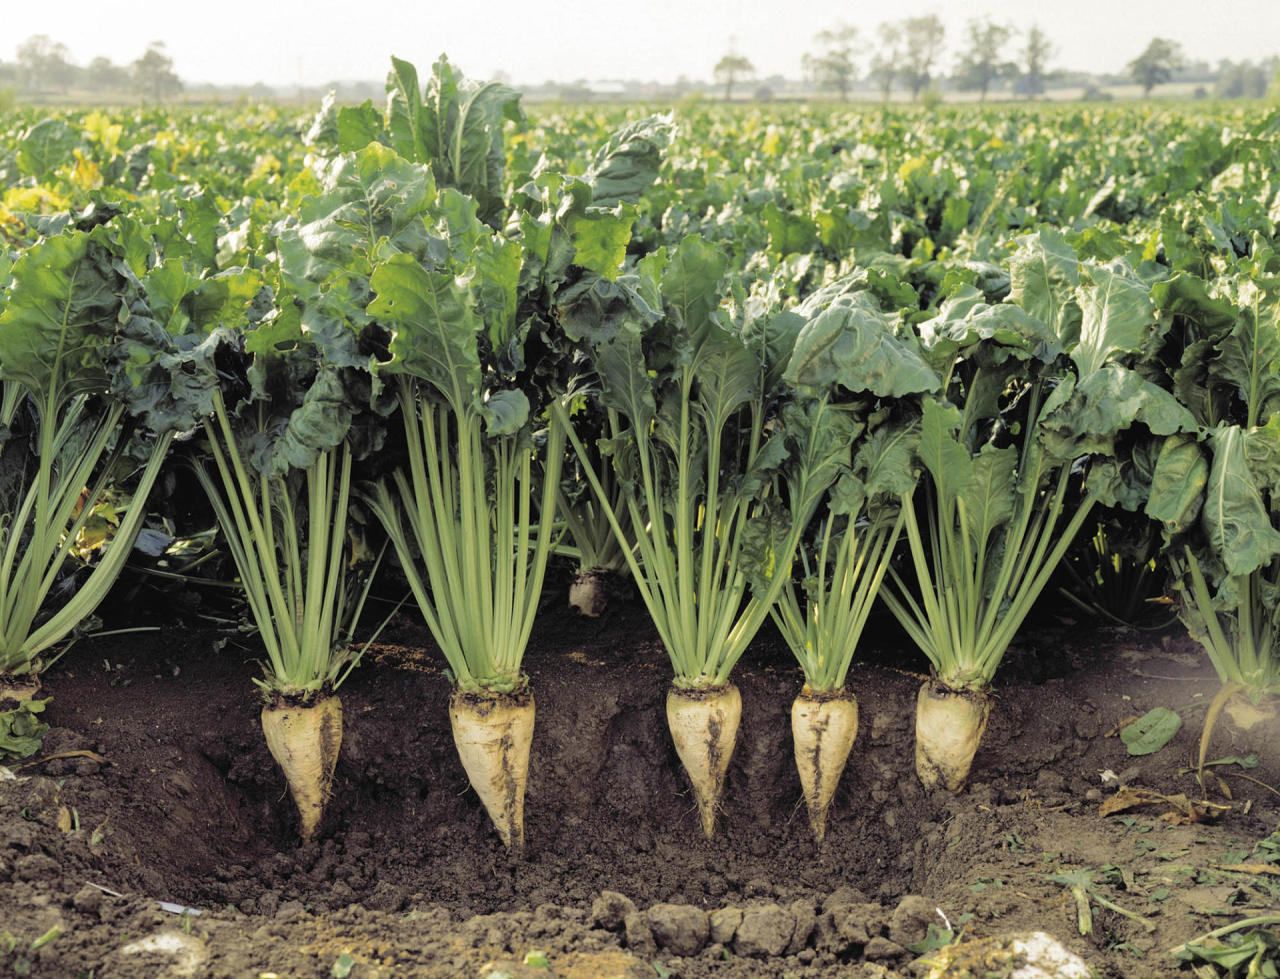 Azerbaijan achieves high performance in sugar beet production - Minister of Agriculture